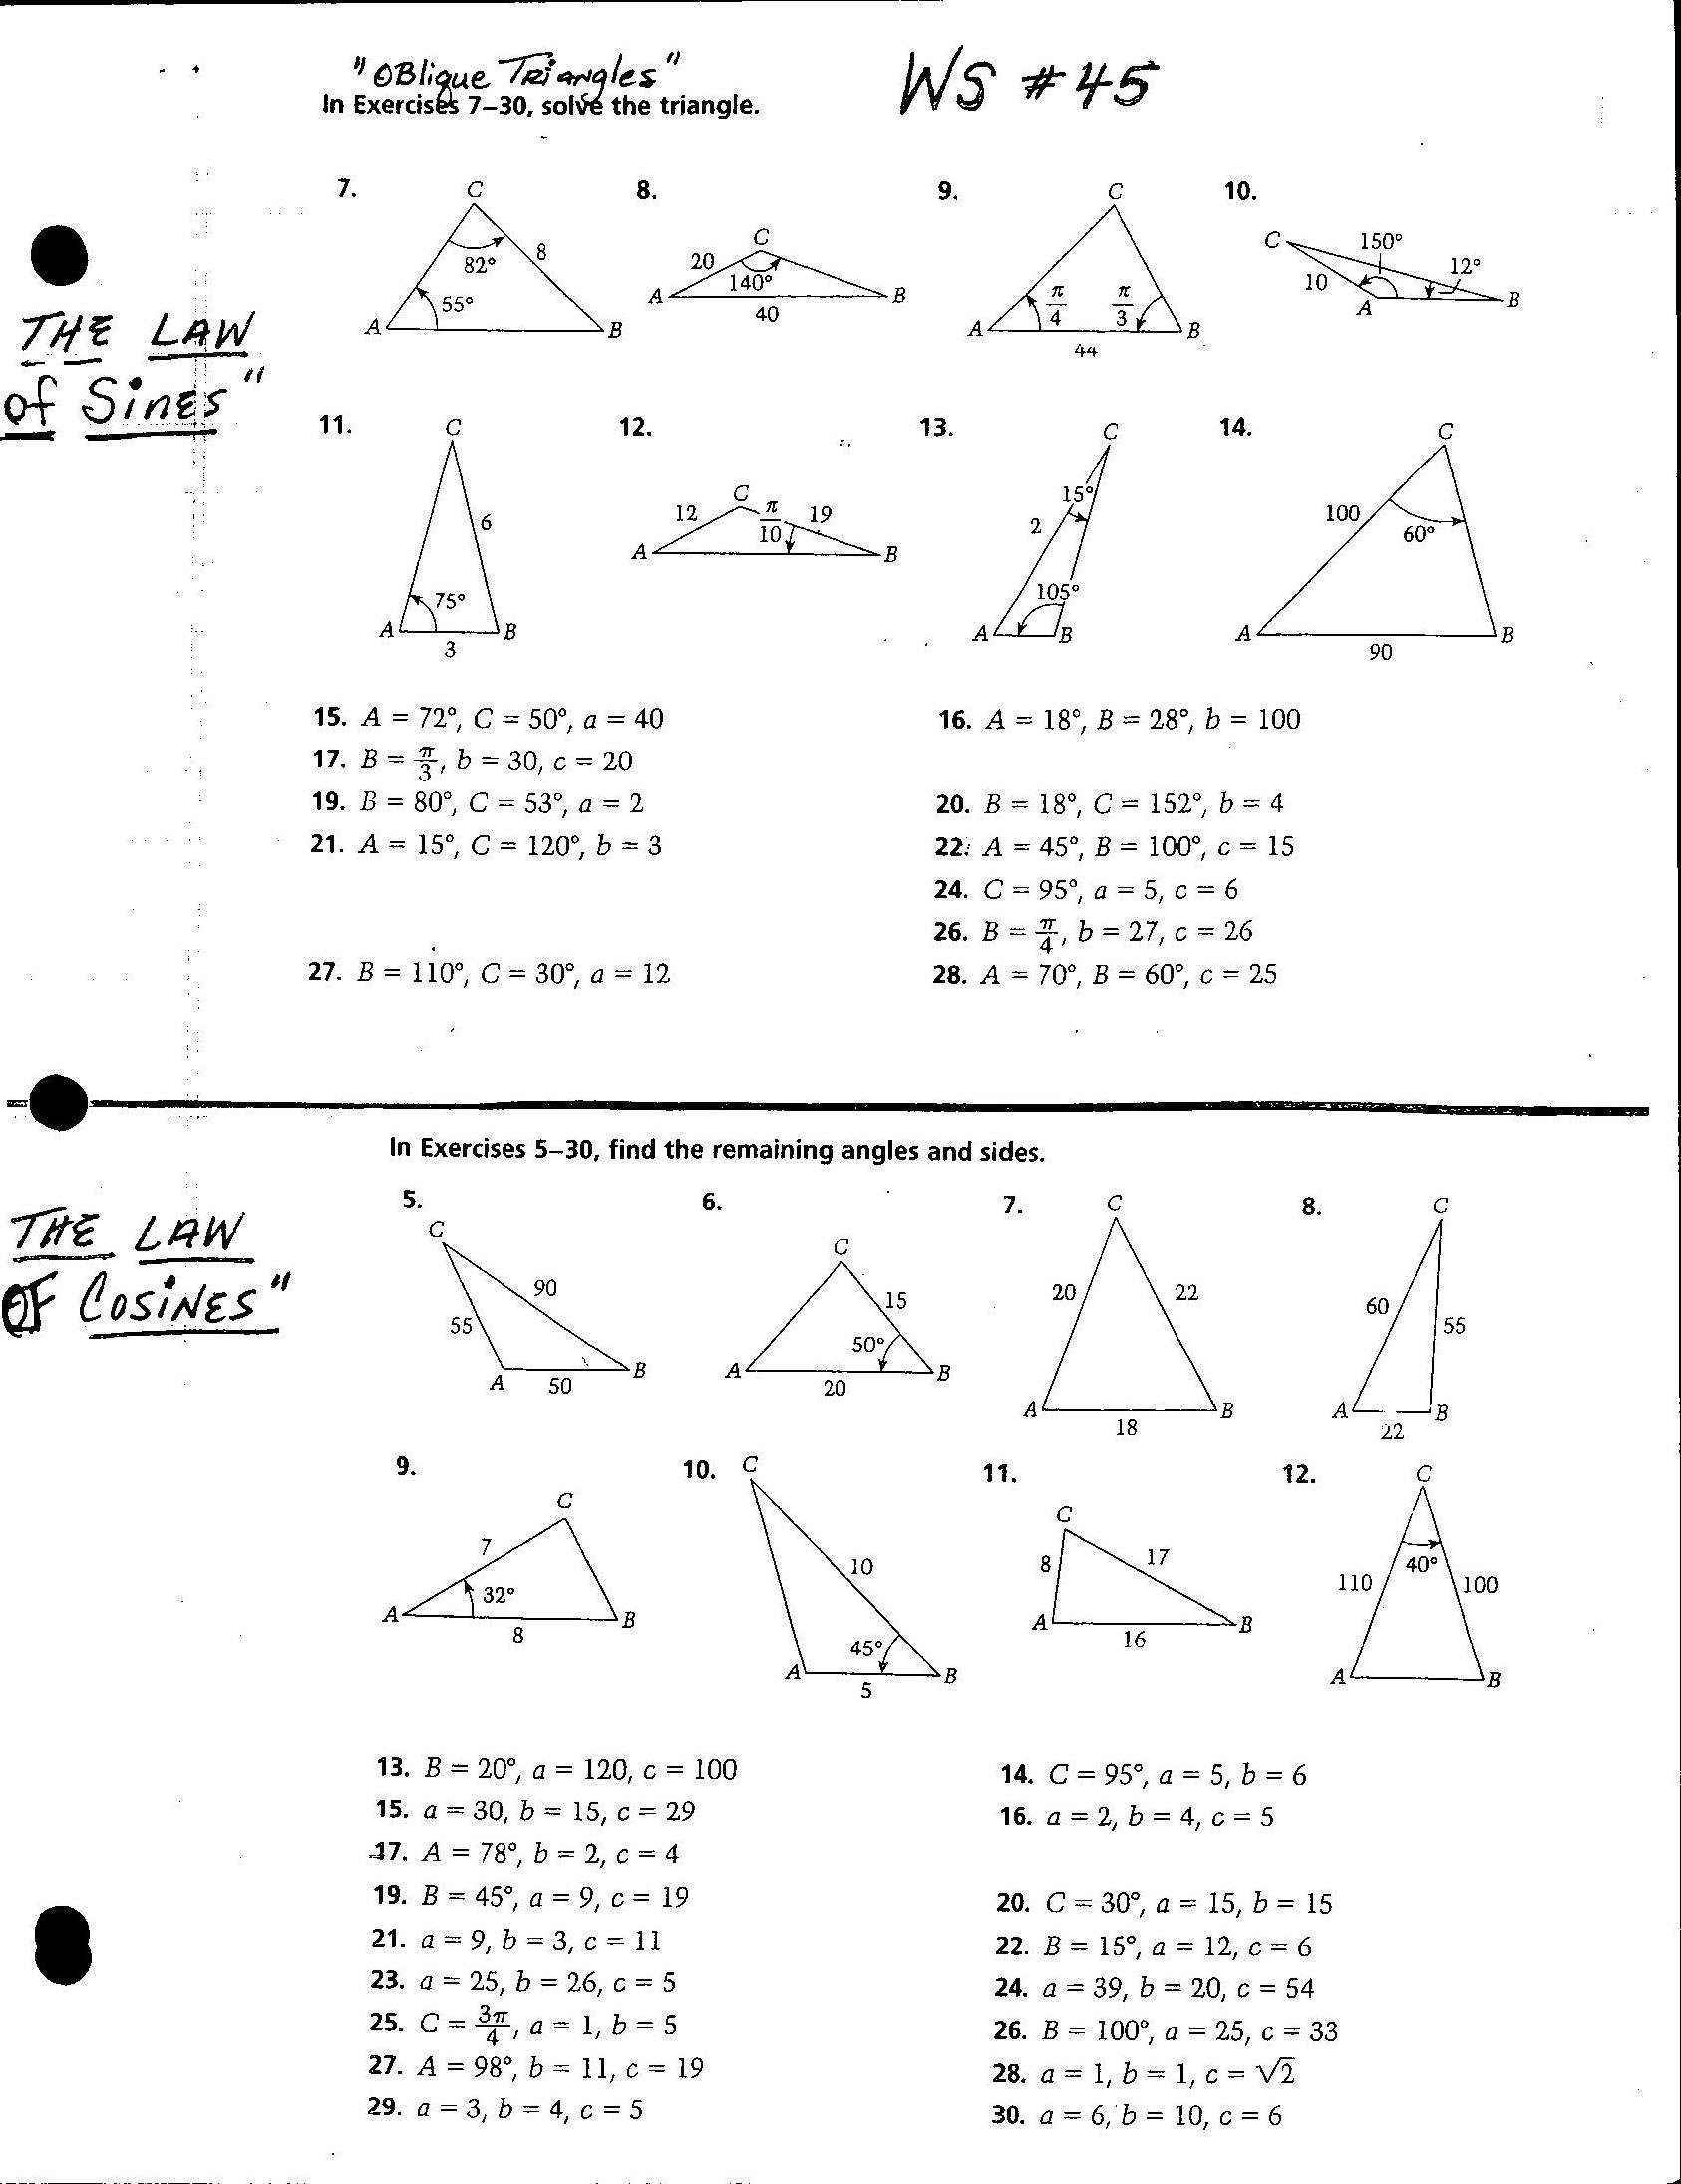 Afm Lessons In Law Of Sines Practice Worksheet Answers